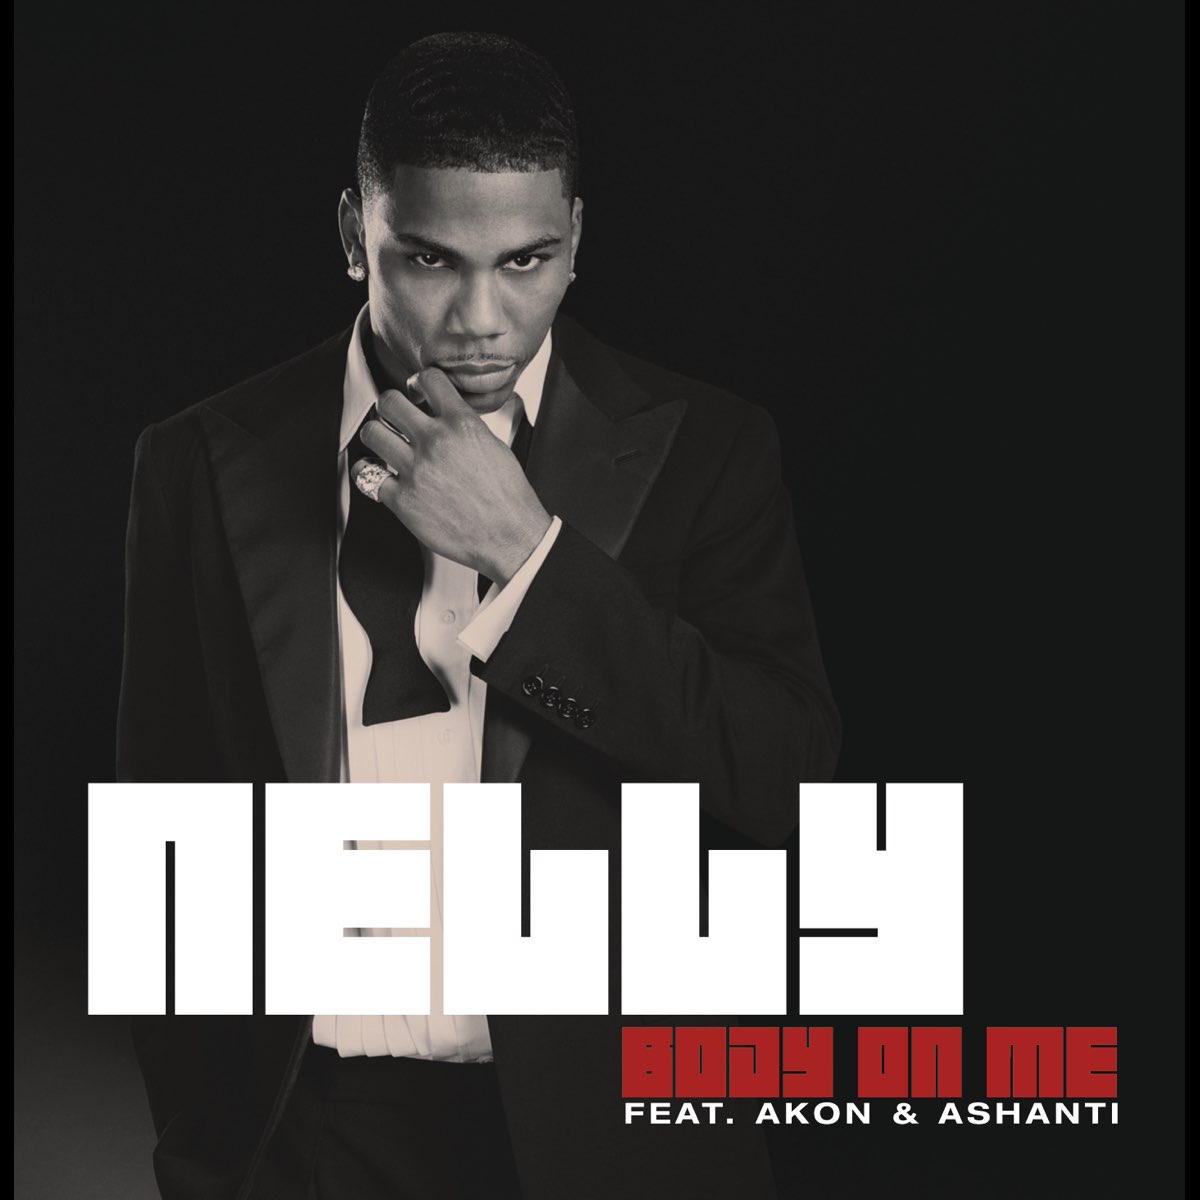 Nelly ft. featuring Akon & Ashanti Body on Me cover artwork